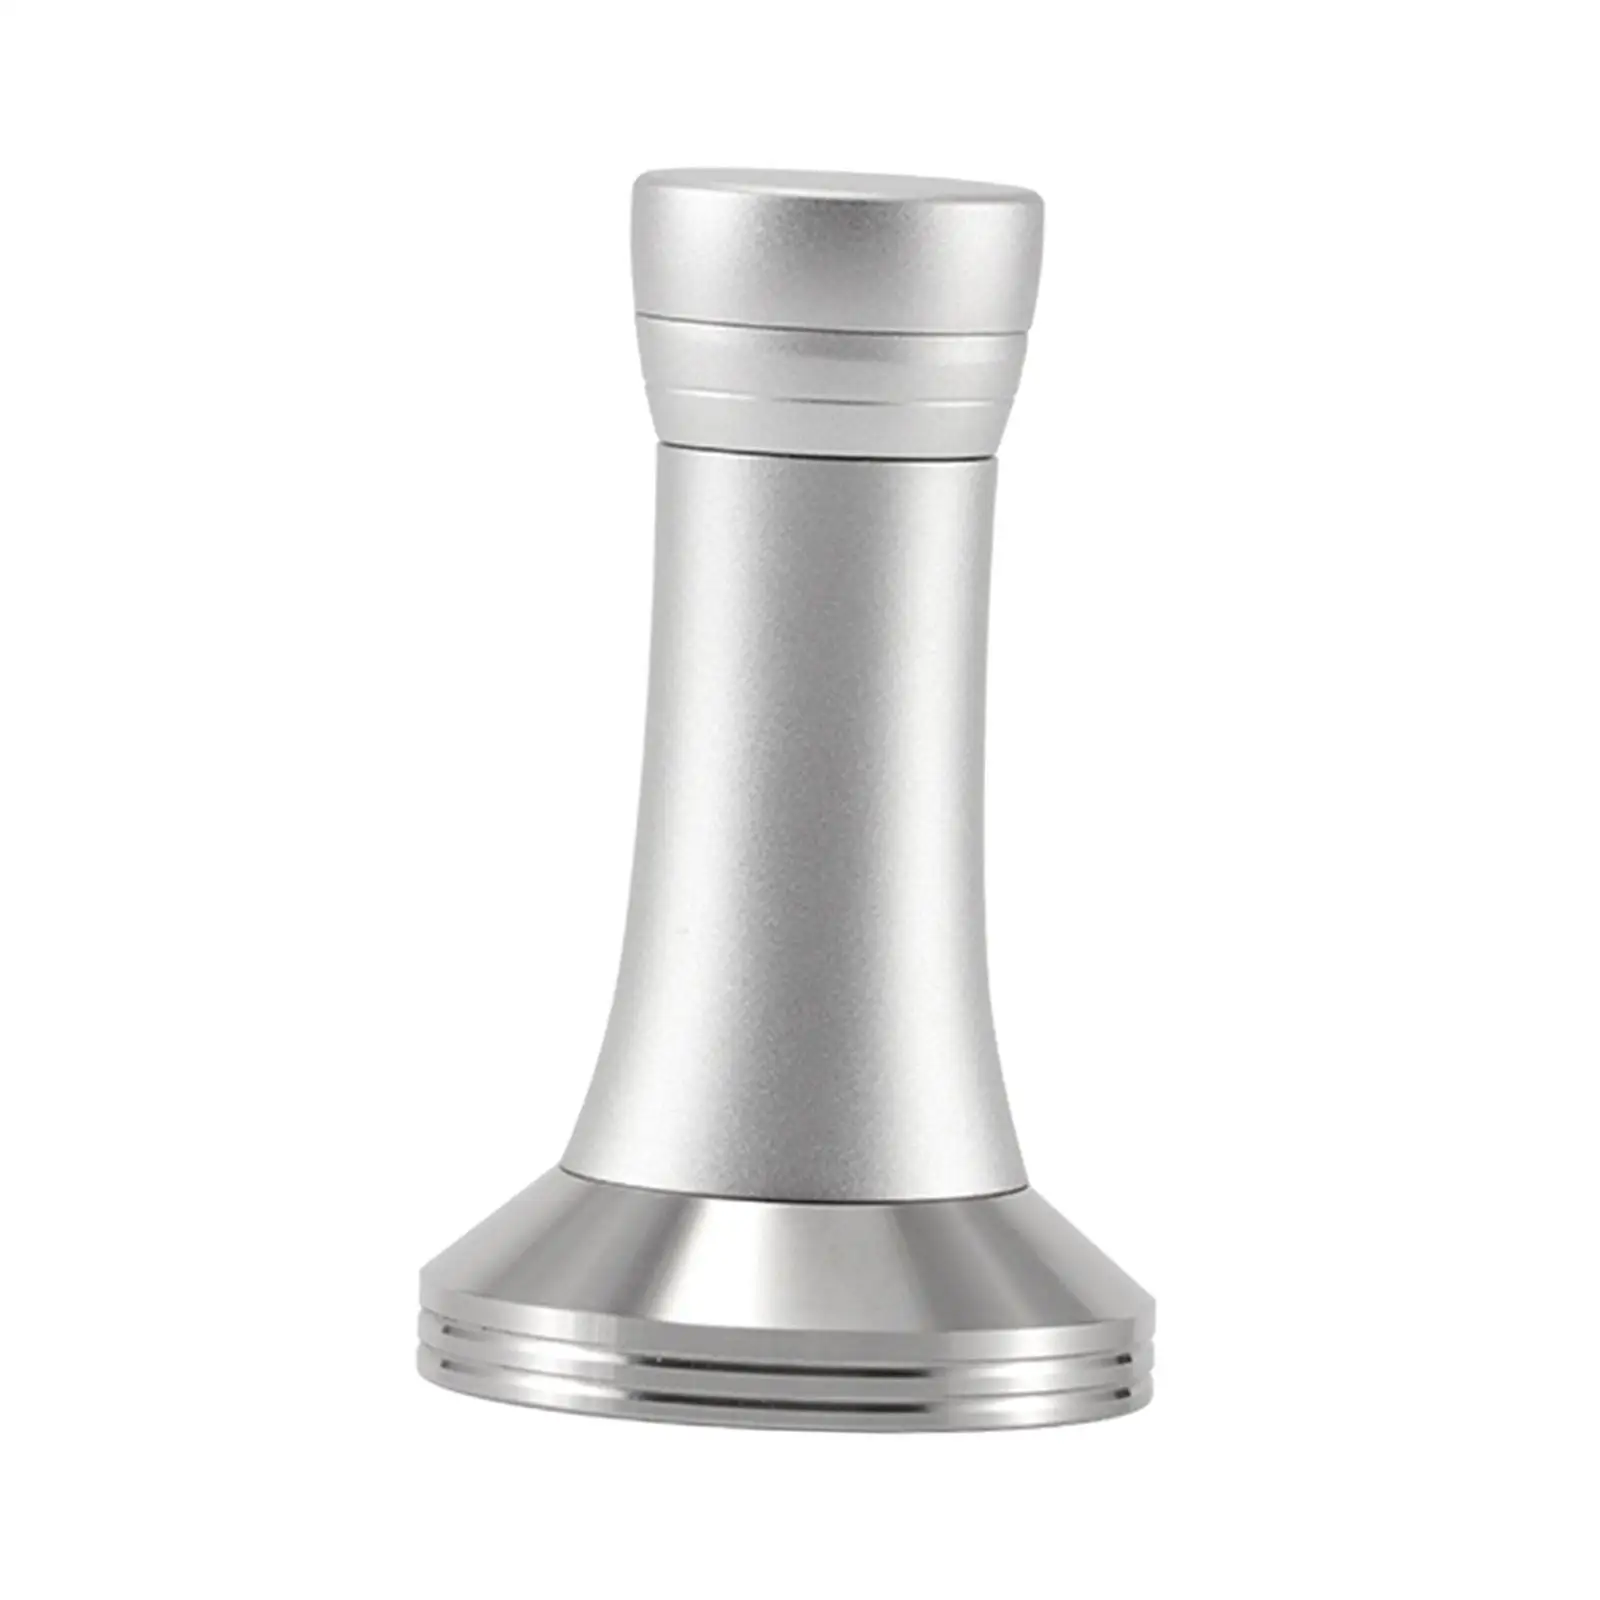 Coffee Distributor and Tamper Espresso Tamper Aluminum Alloy Espresso Hand Tampers for Restaurants Hotel Gifts for Coffee Lovers